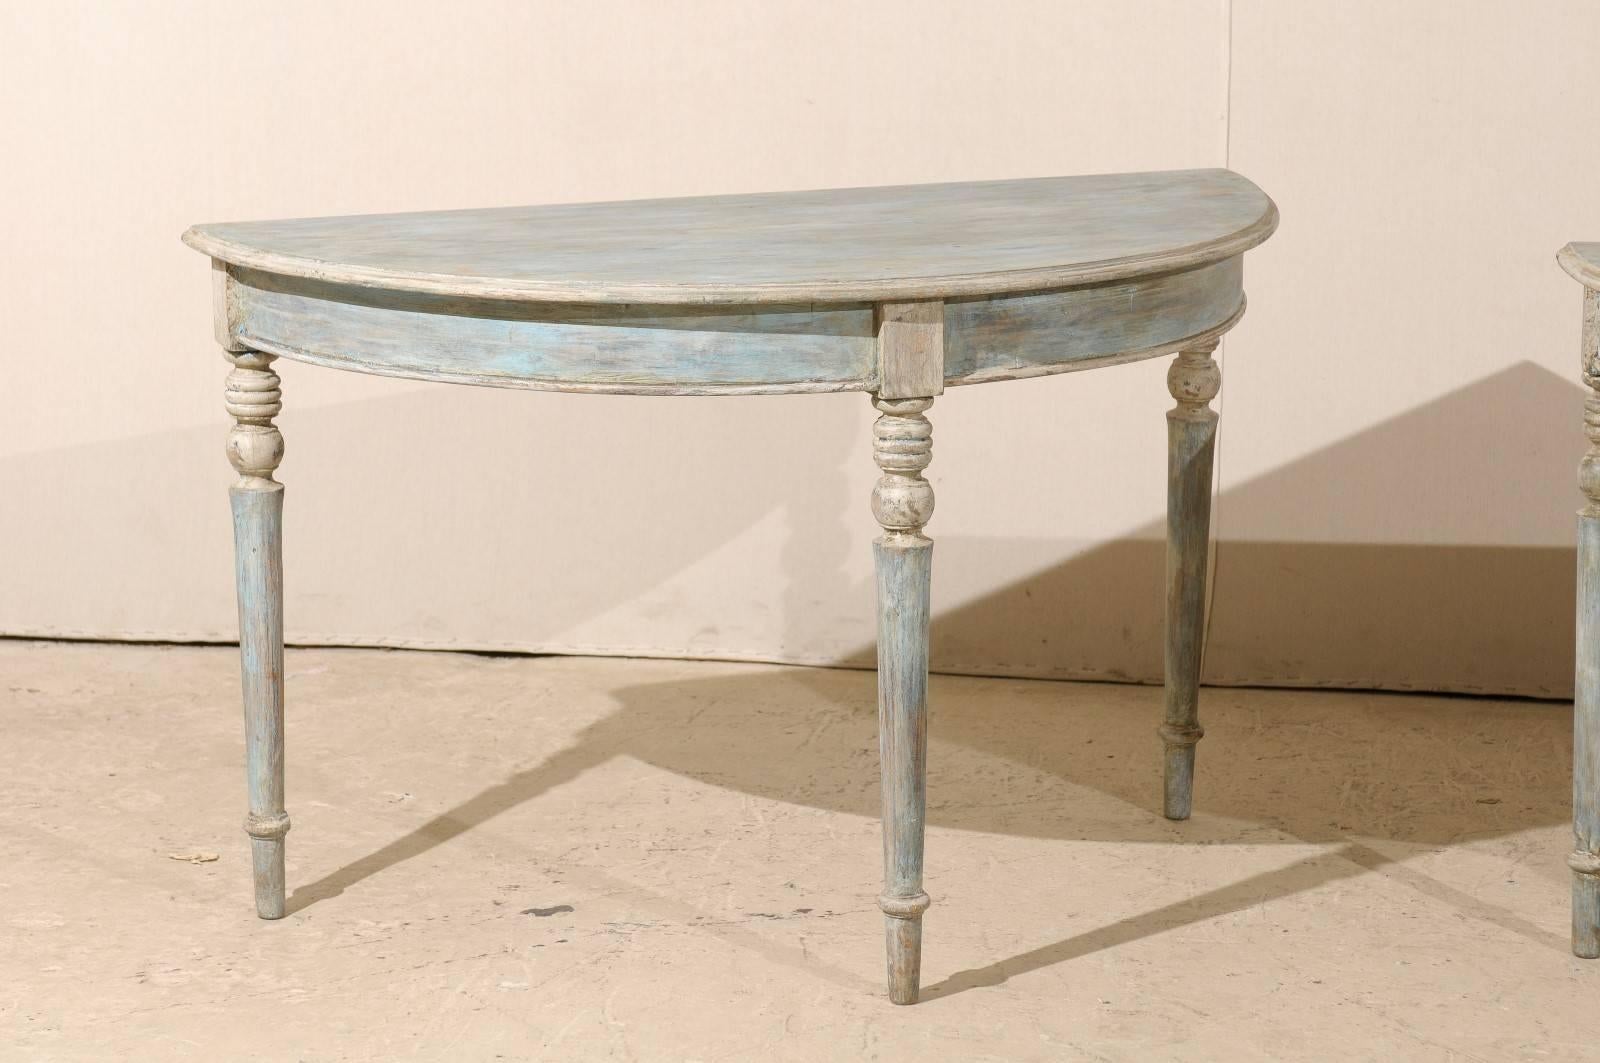 Pair of Swedish Painted Wood Demilunes in Blue, Grey and Beige Color 1